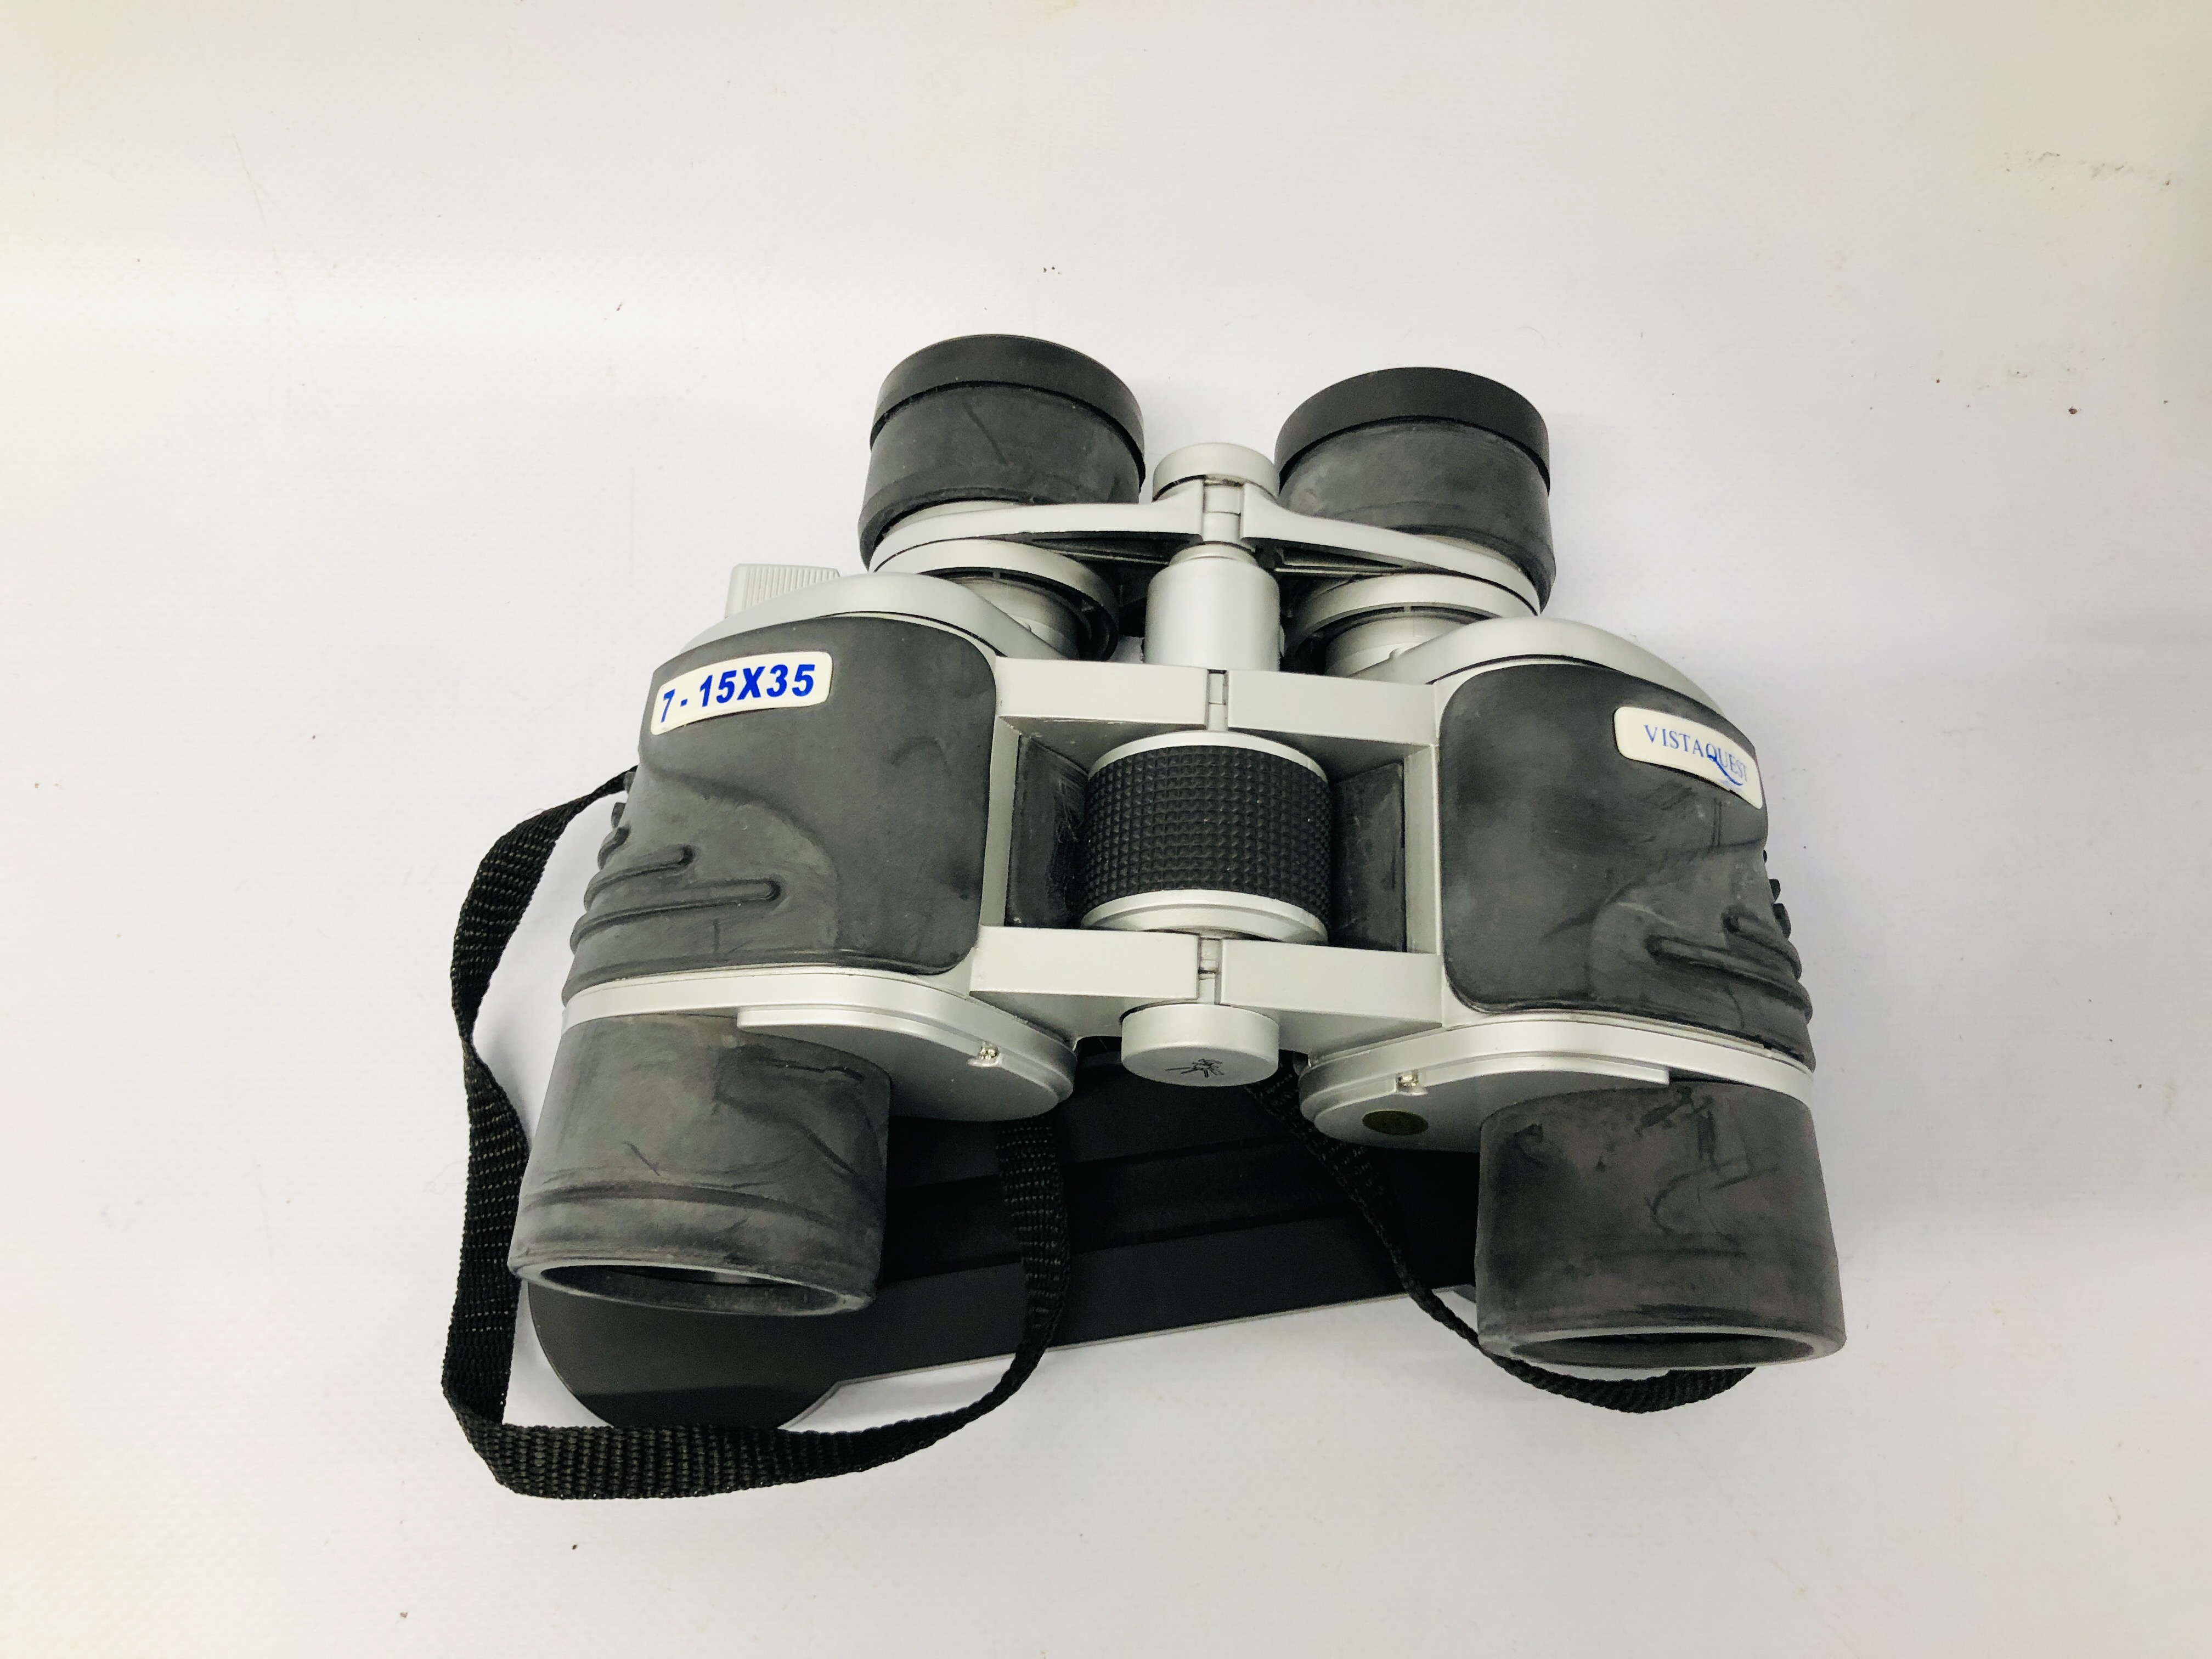 PAIR OF BRESSER 8 X 40 BINOCULARS WITH CASE ALONG WITH A PAIR OF VISTA QUEST BINOCULARS AND CASE - Image 9 of 11